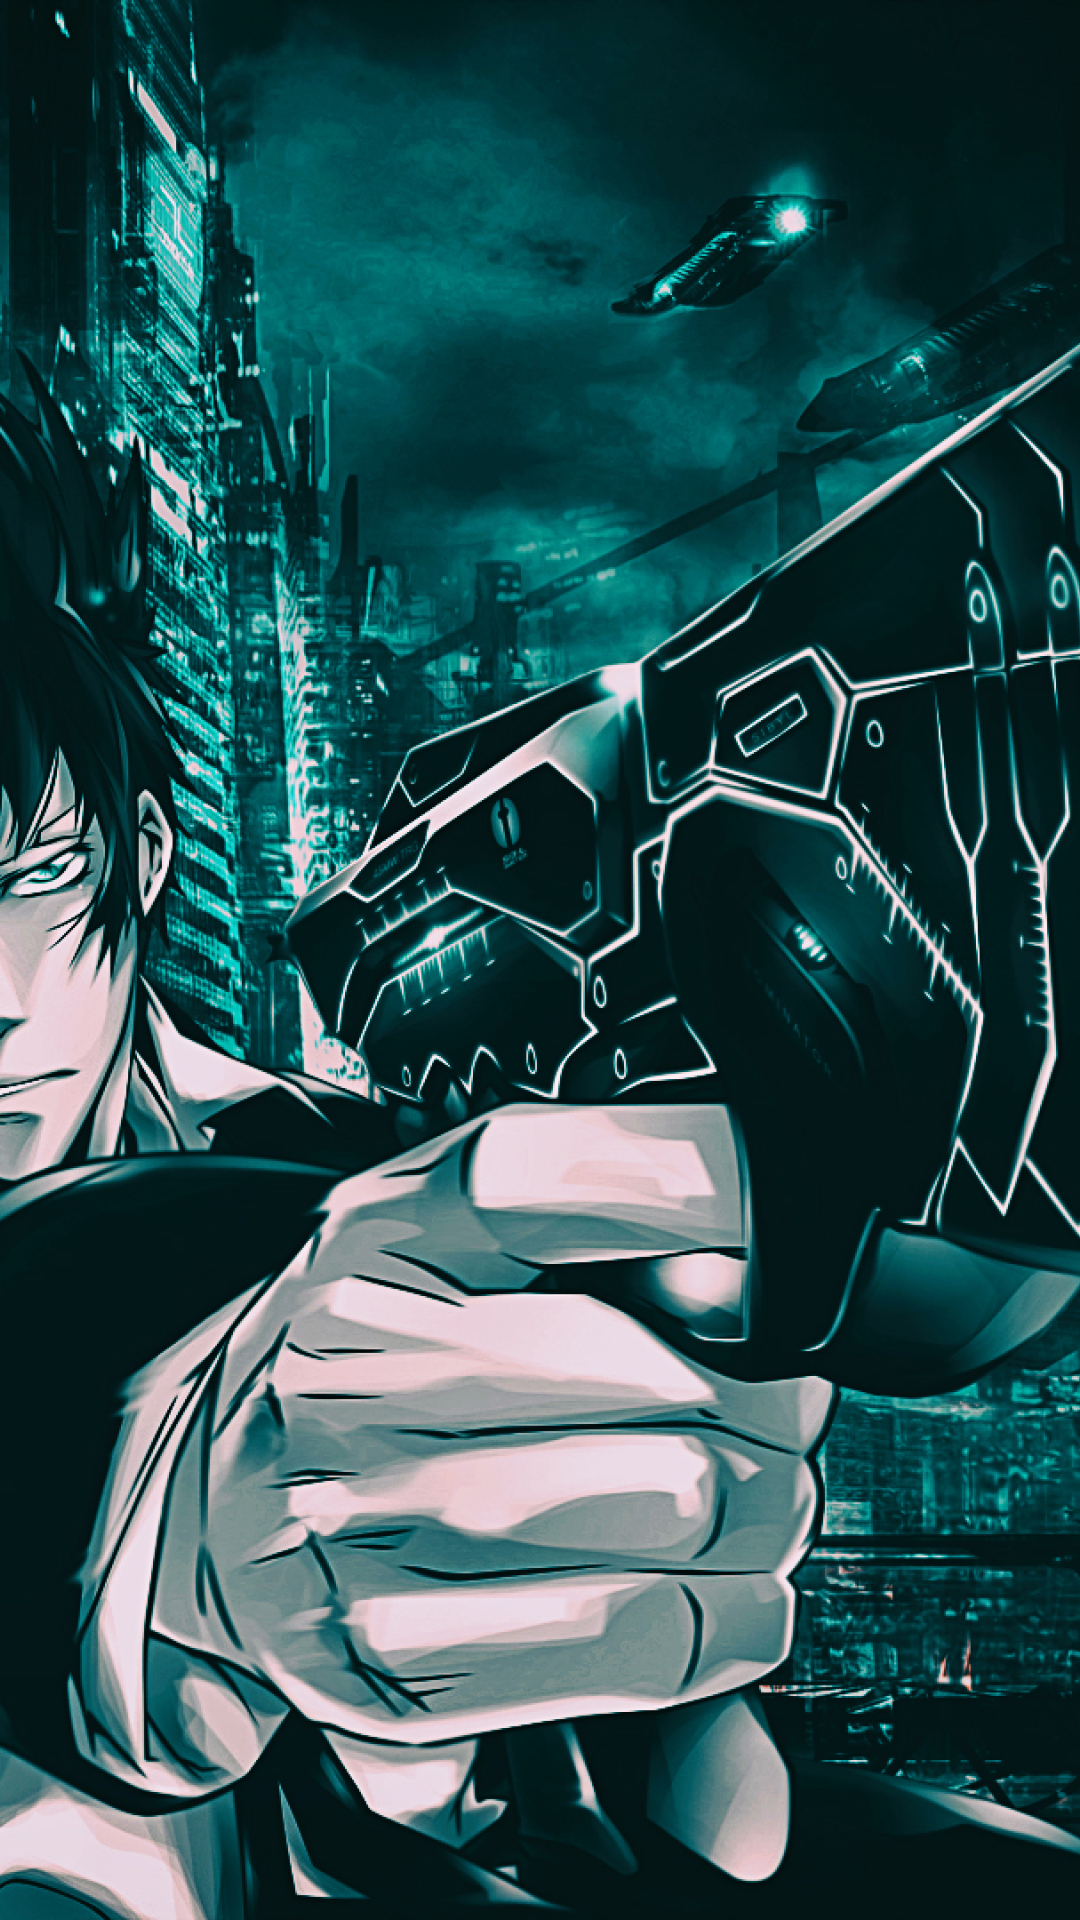 1080x19 Shinya Kogami From Psycho Pass Iphone 7 6s 6 Plus And Pixel Xl One Plus 3 3t 5 Wallpaper Hd Anime 4k Wallpapers Images Photos And Background